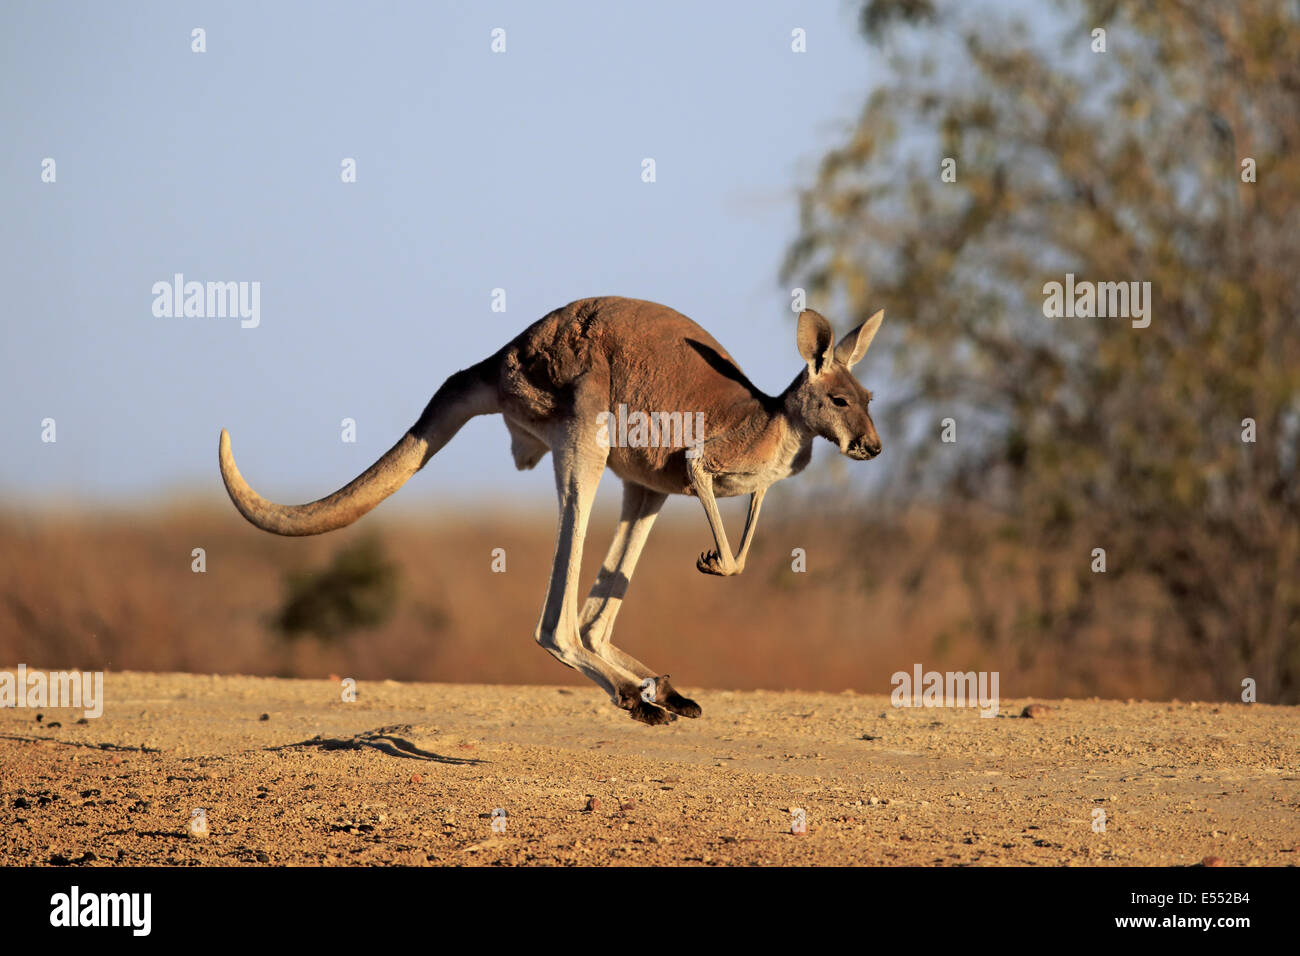 Red Kangaroo (Macropus rufus) adult male, jumping in dry outback, Sturt N.P., New South Wales, Australia, October Stock Photo